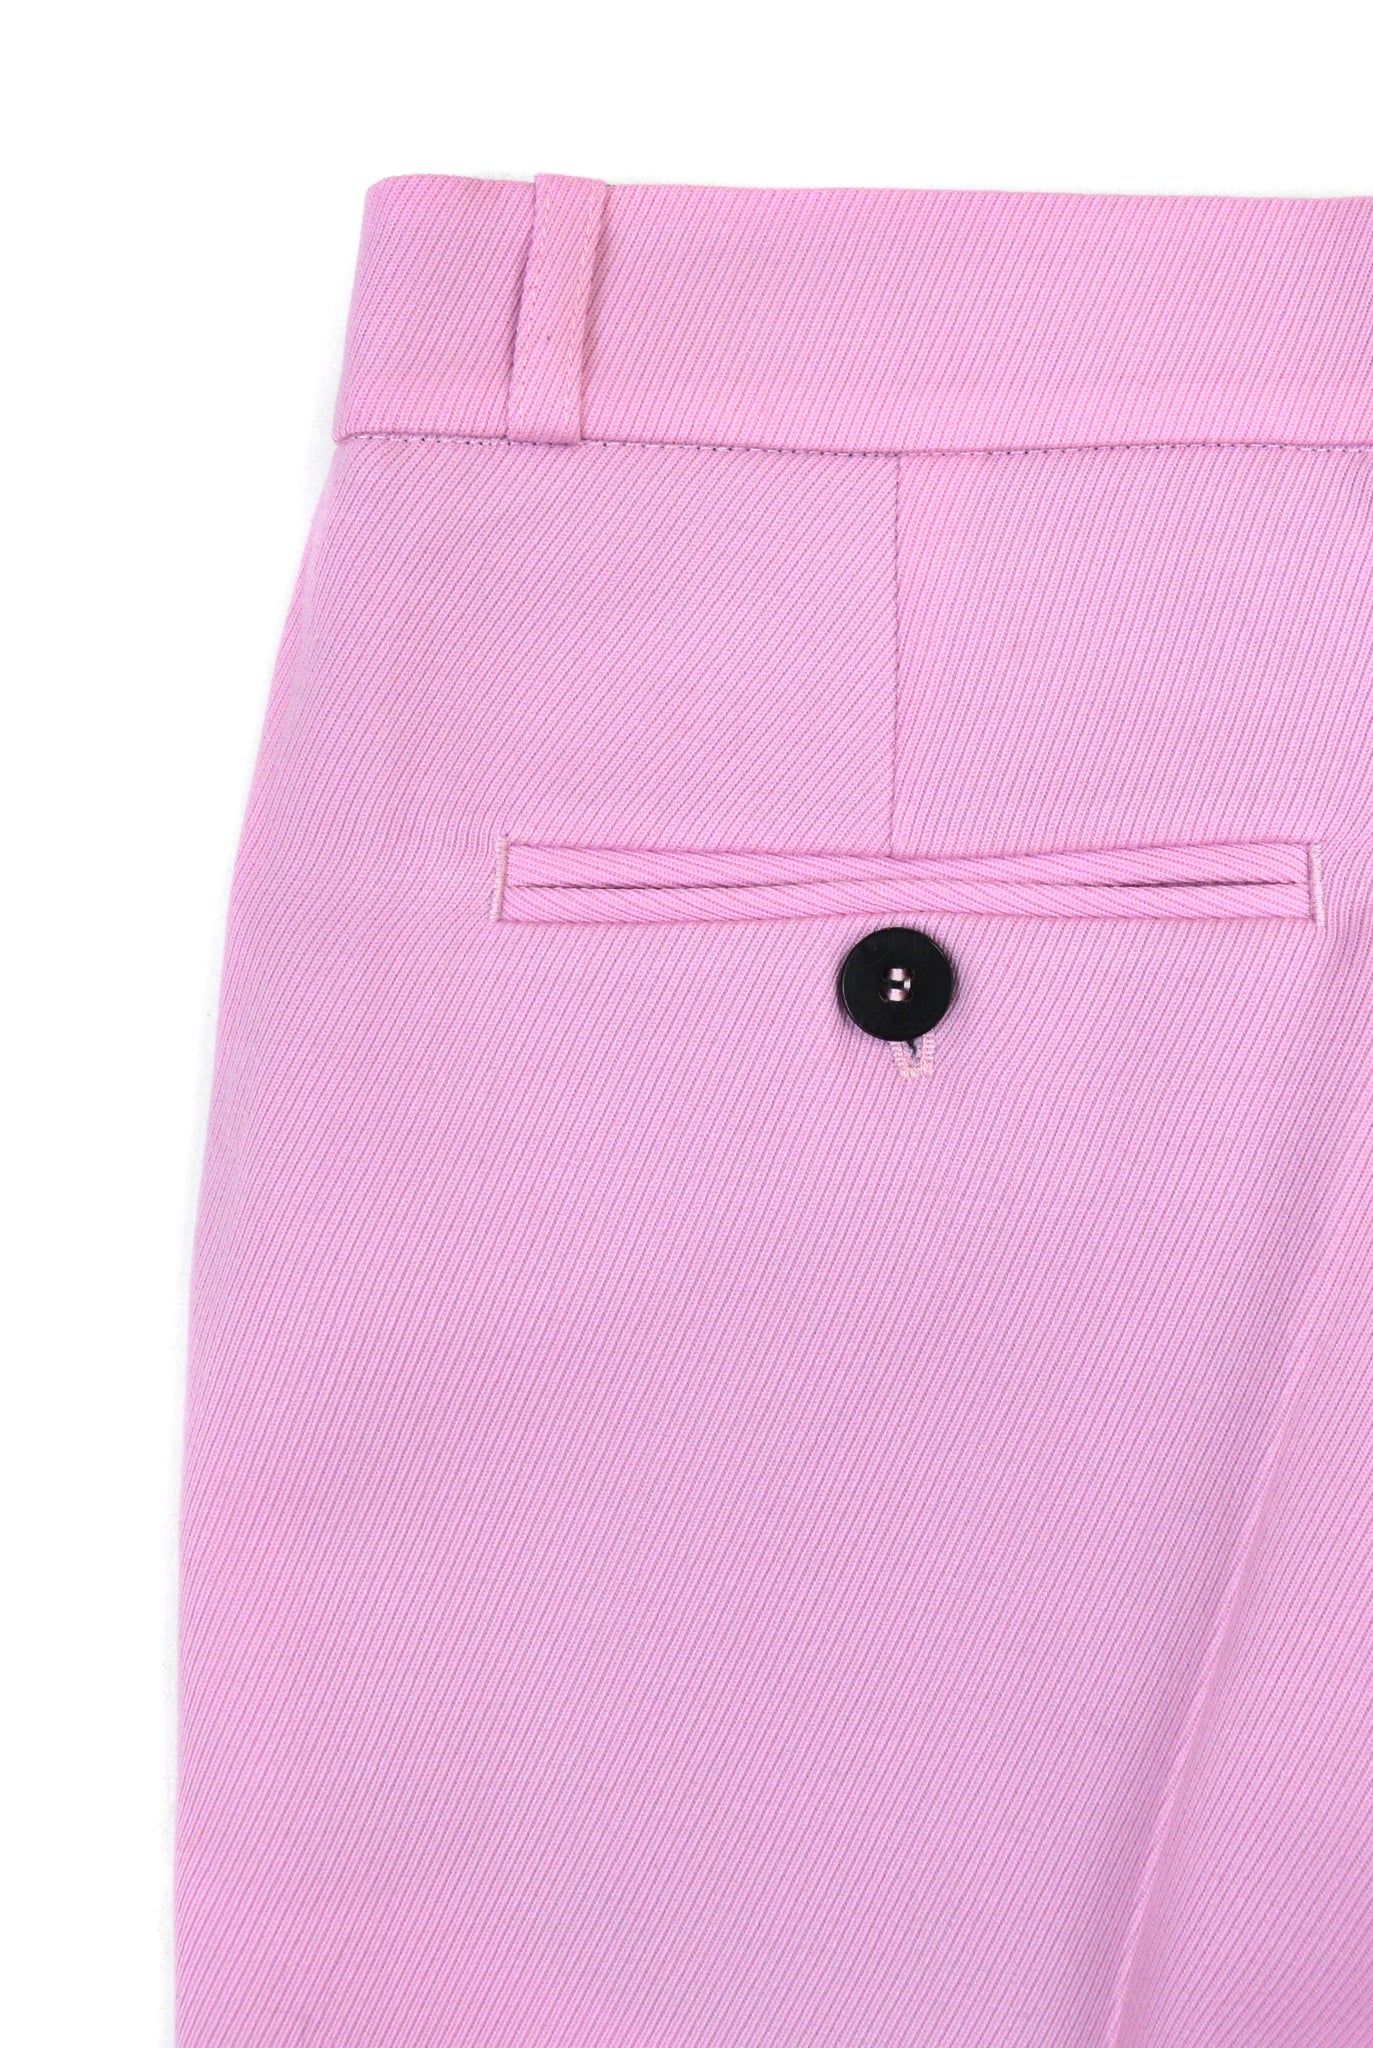 Ernest W. Baker Flared Trousers, Pink